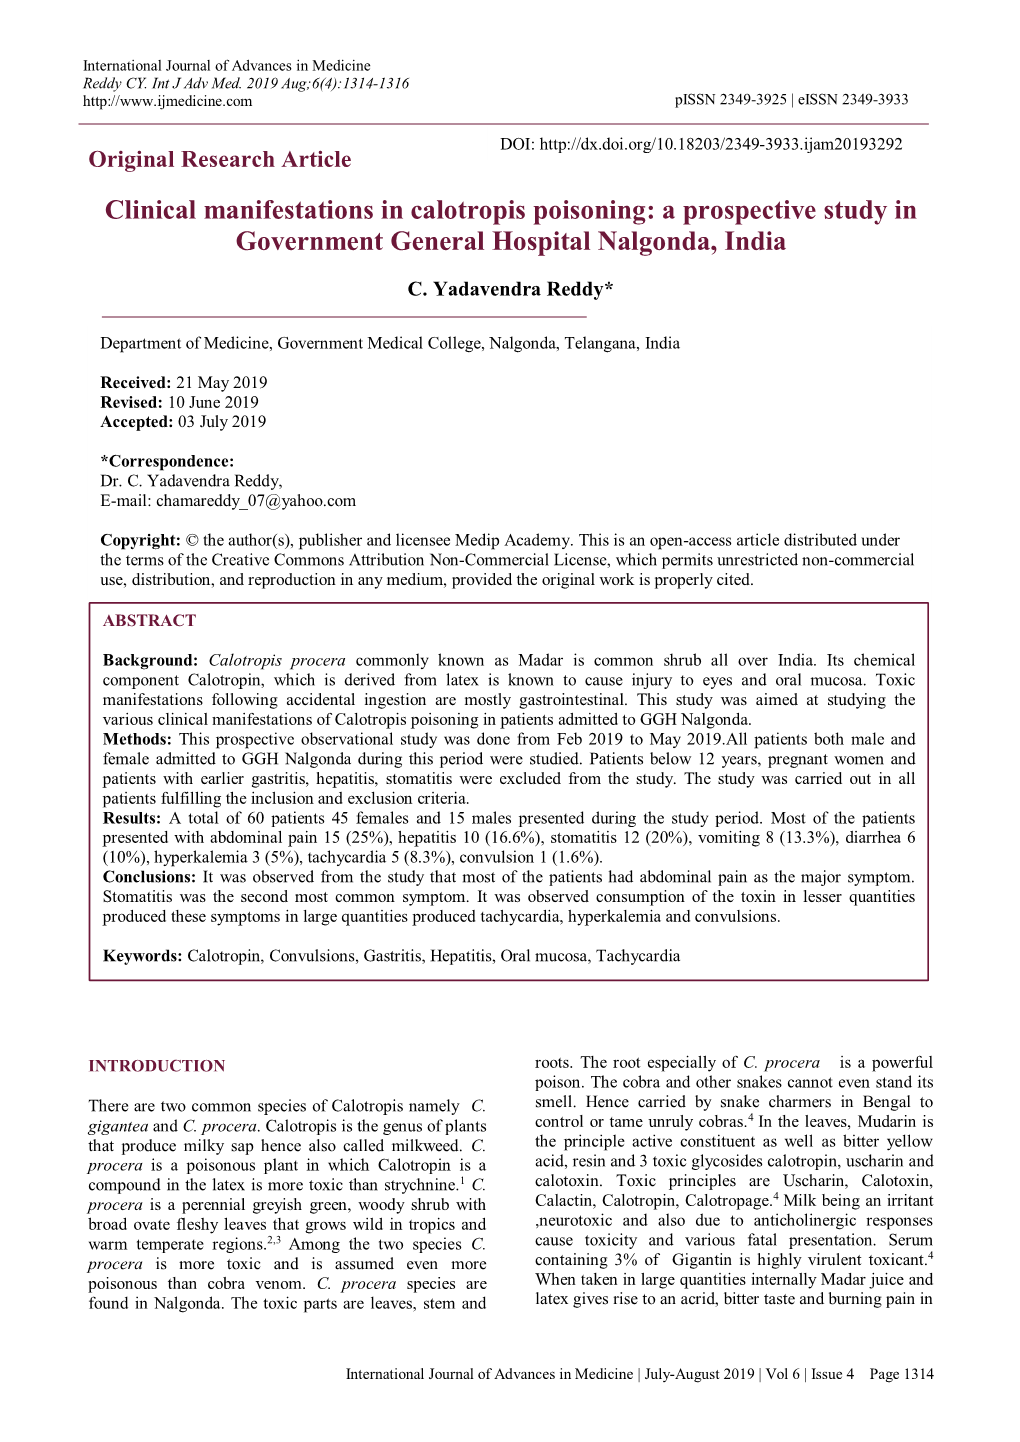 Clinical Manifestations in Calotropis Poisoning: a Prospective Study in Government General Hospital Nalgonda, India